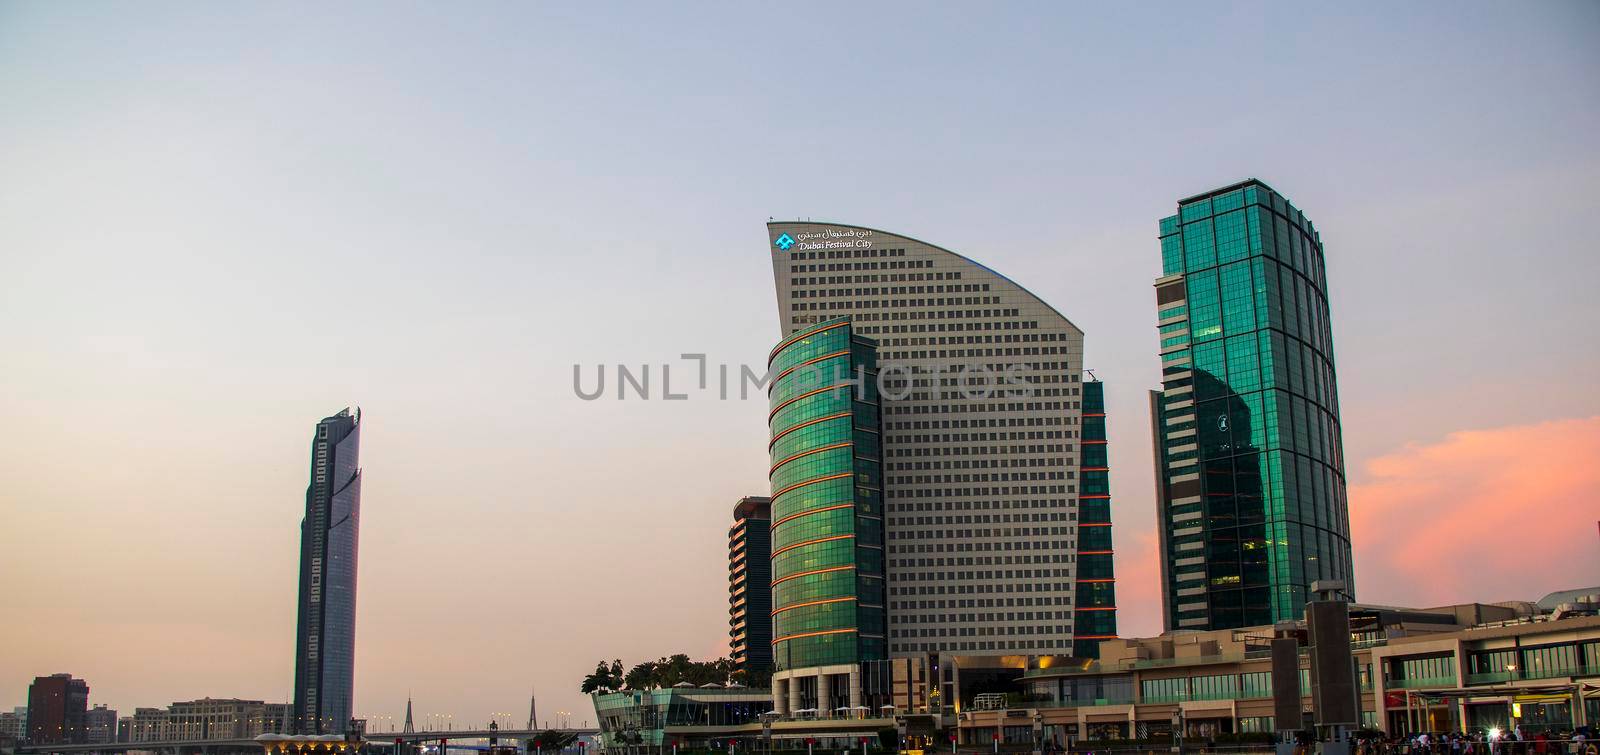 Building of intercontinental hotel in Dubai Festival city. Outdoors